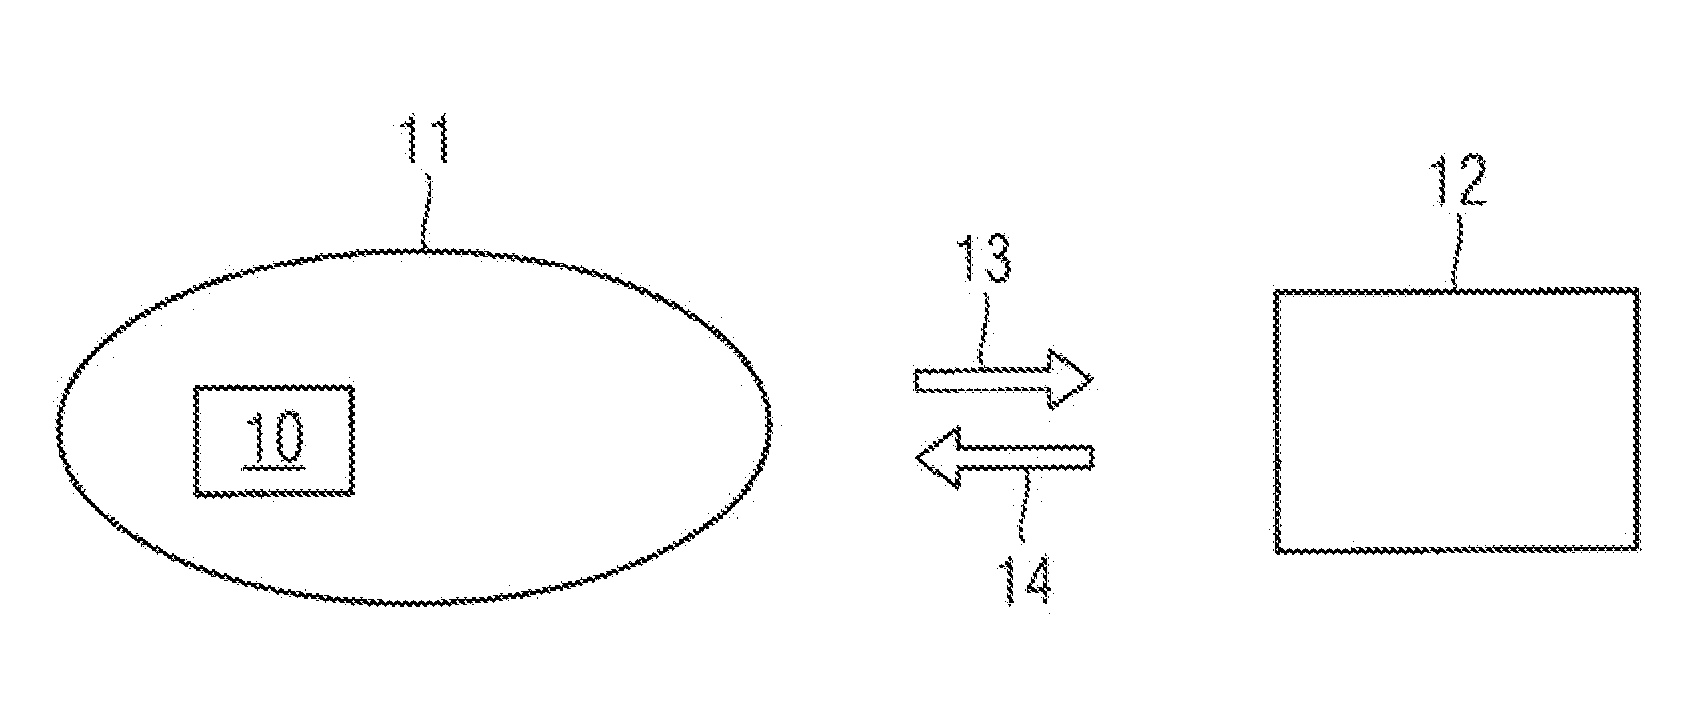 Gateway network element, a method, and a group of load balanced access points configured for load balancing in a communications network